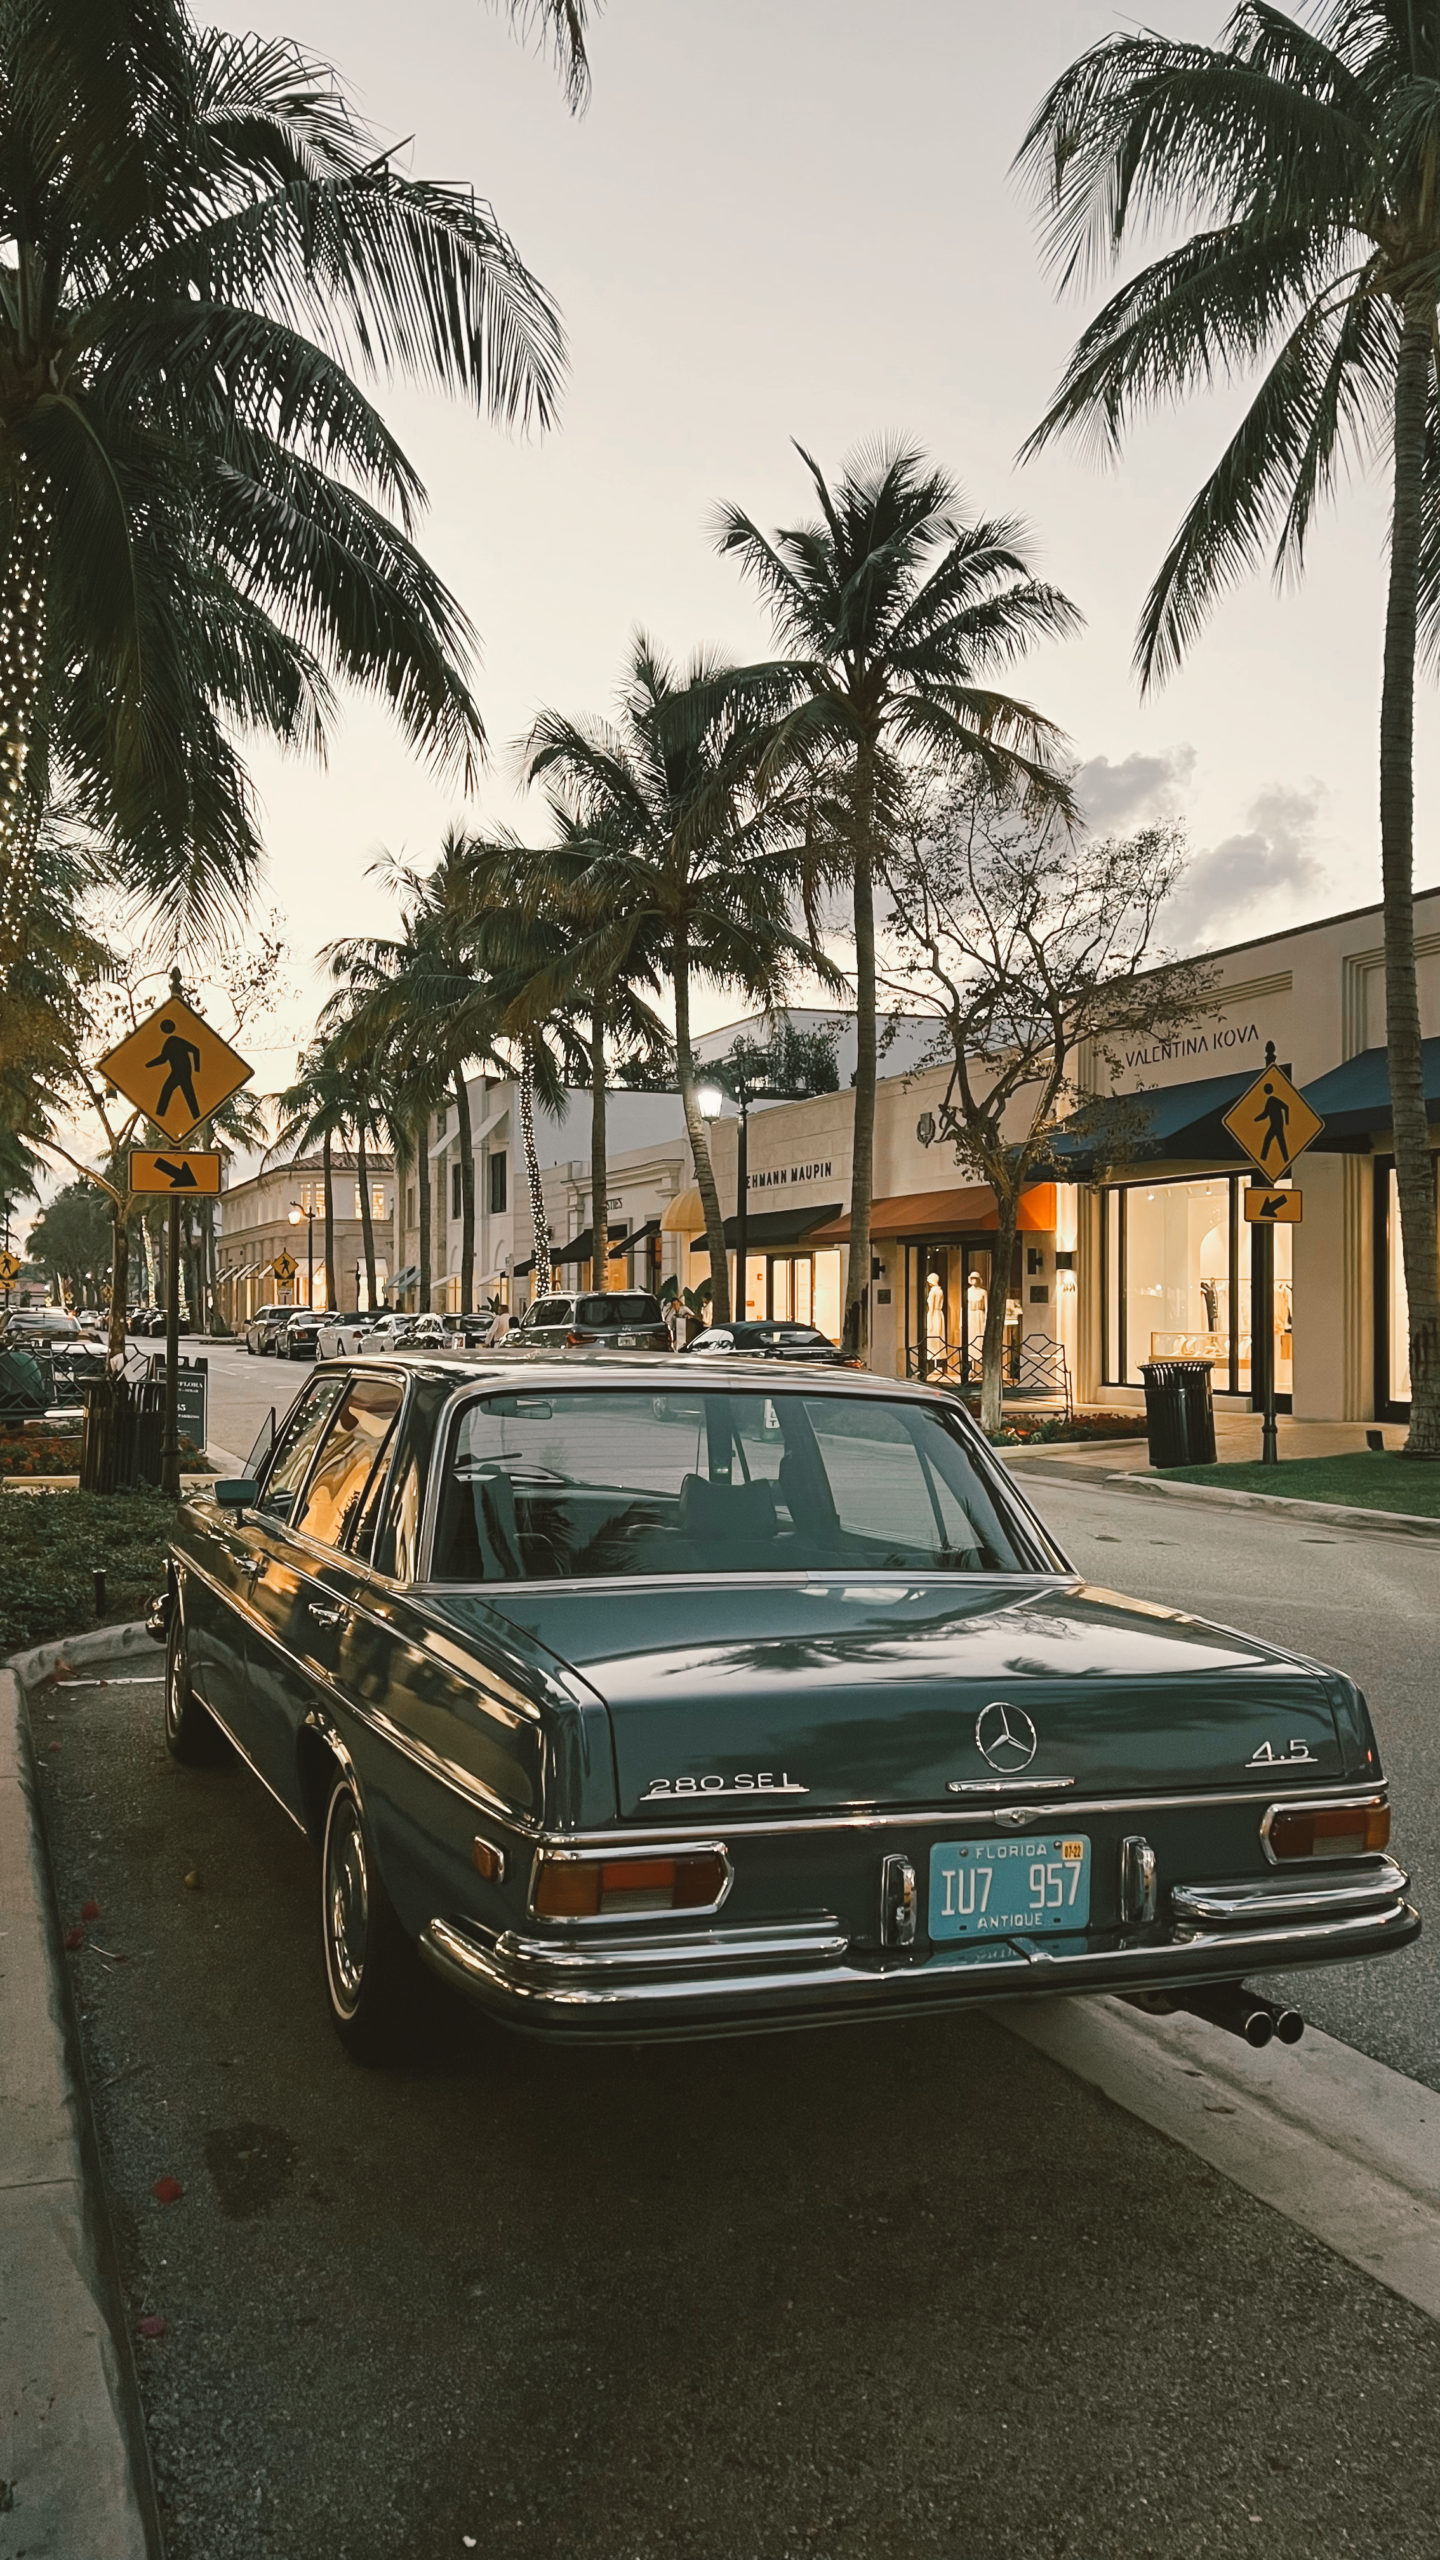 A photo of a car in front of palm trees.